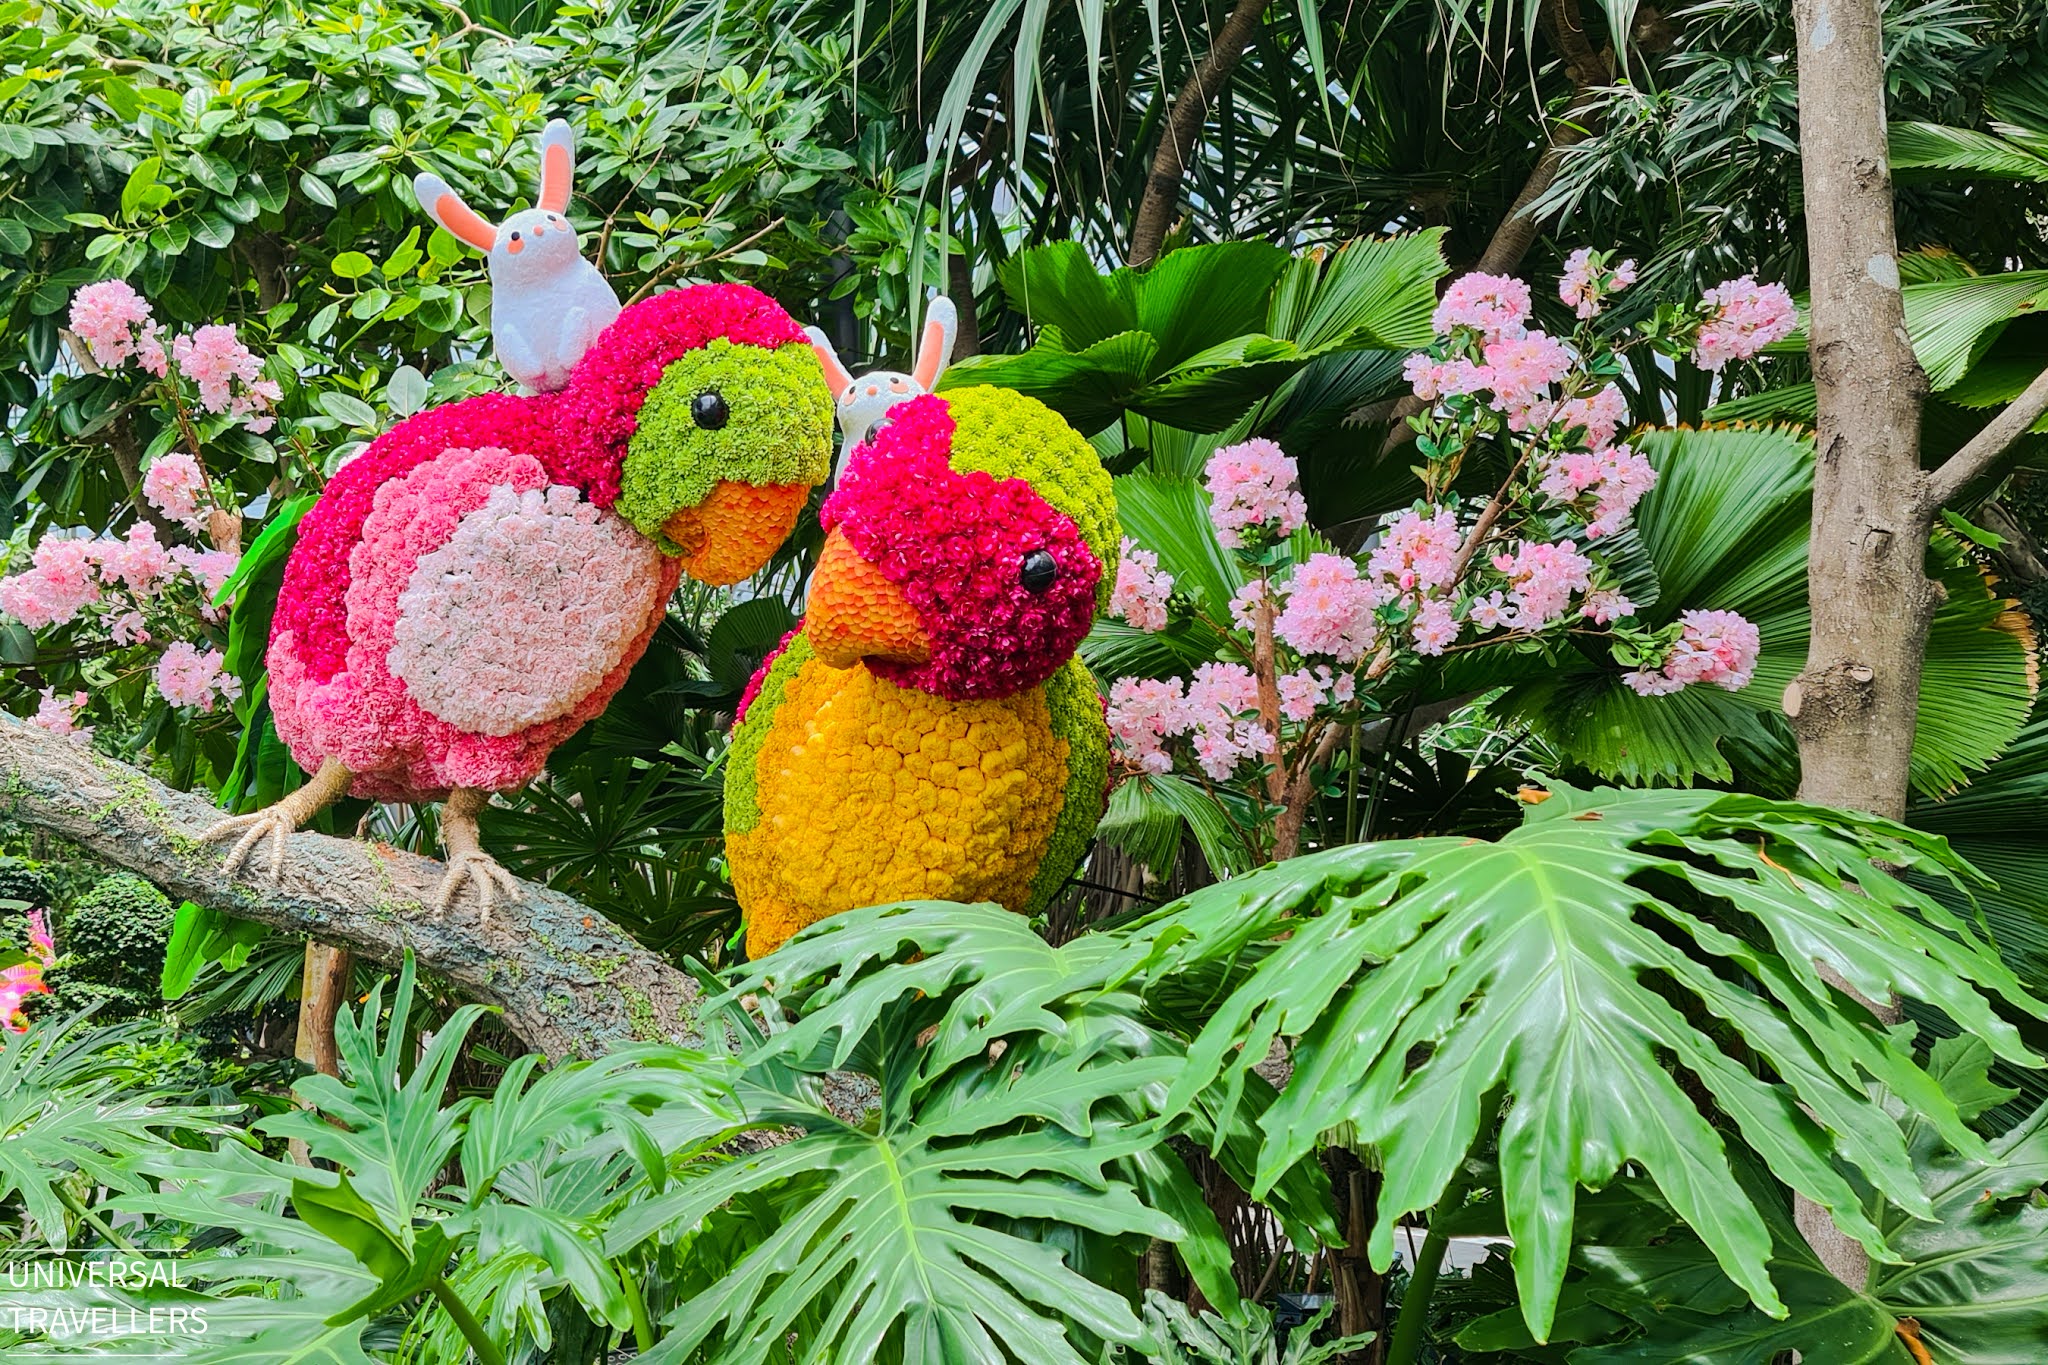 Bird sculptures inside the Topiary Walk of Canopy Park, located at level 5 inside the Jewel Changi Airport